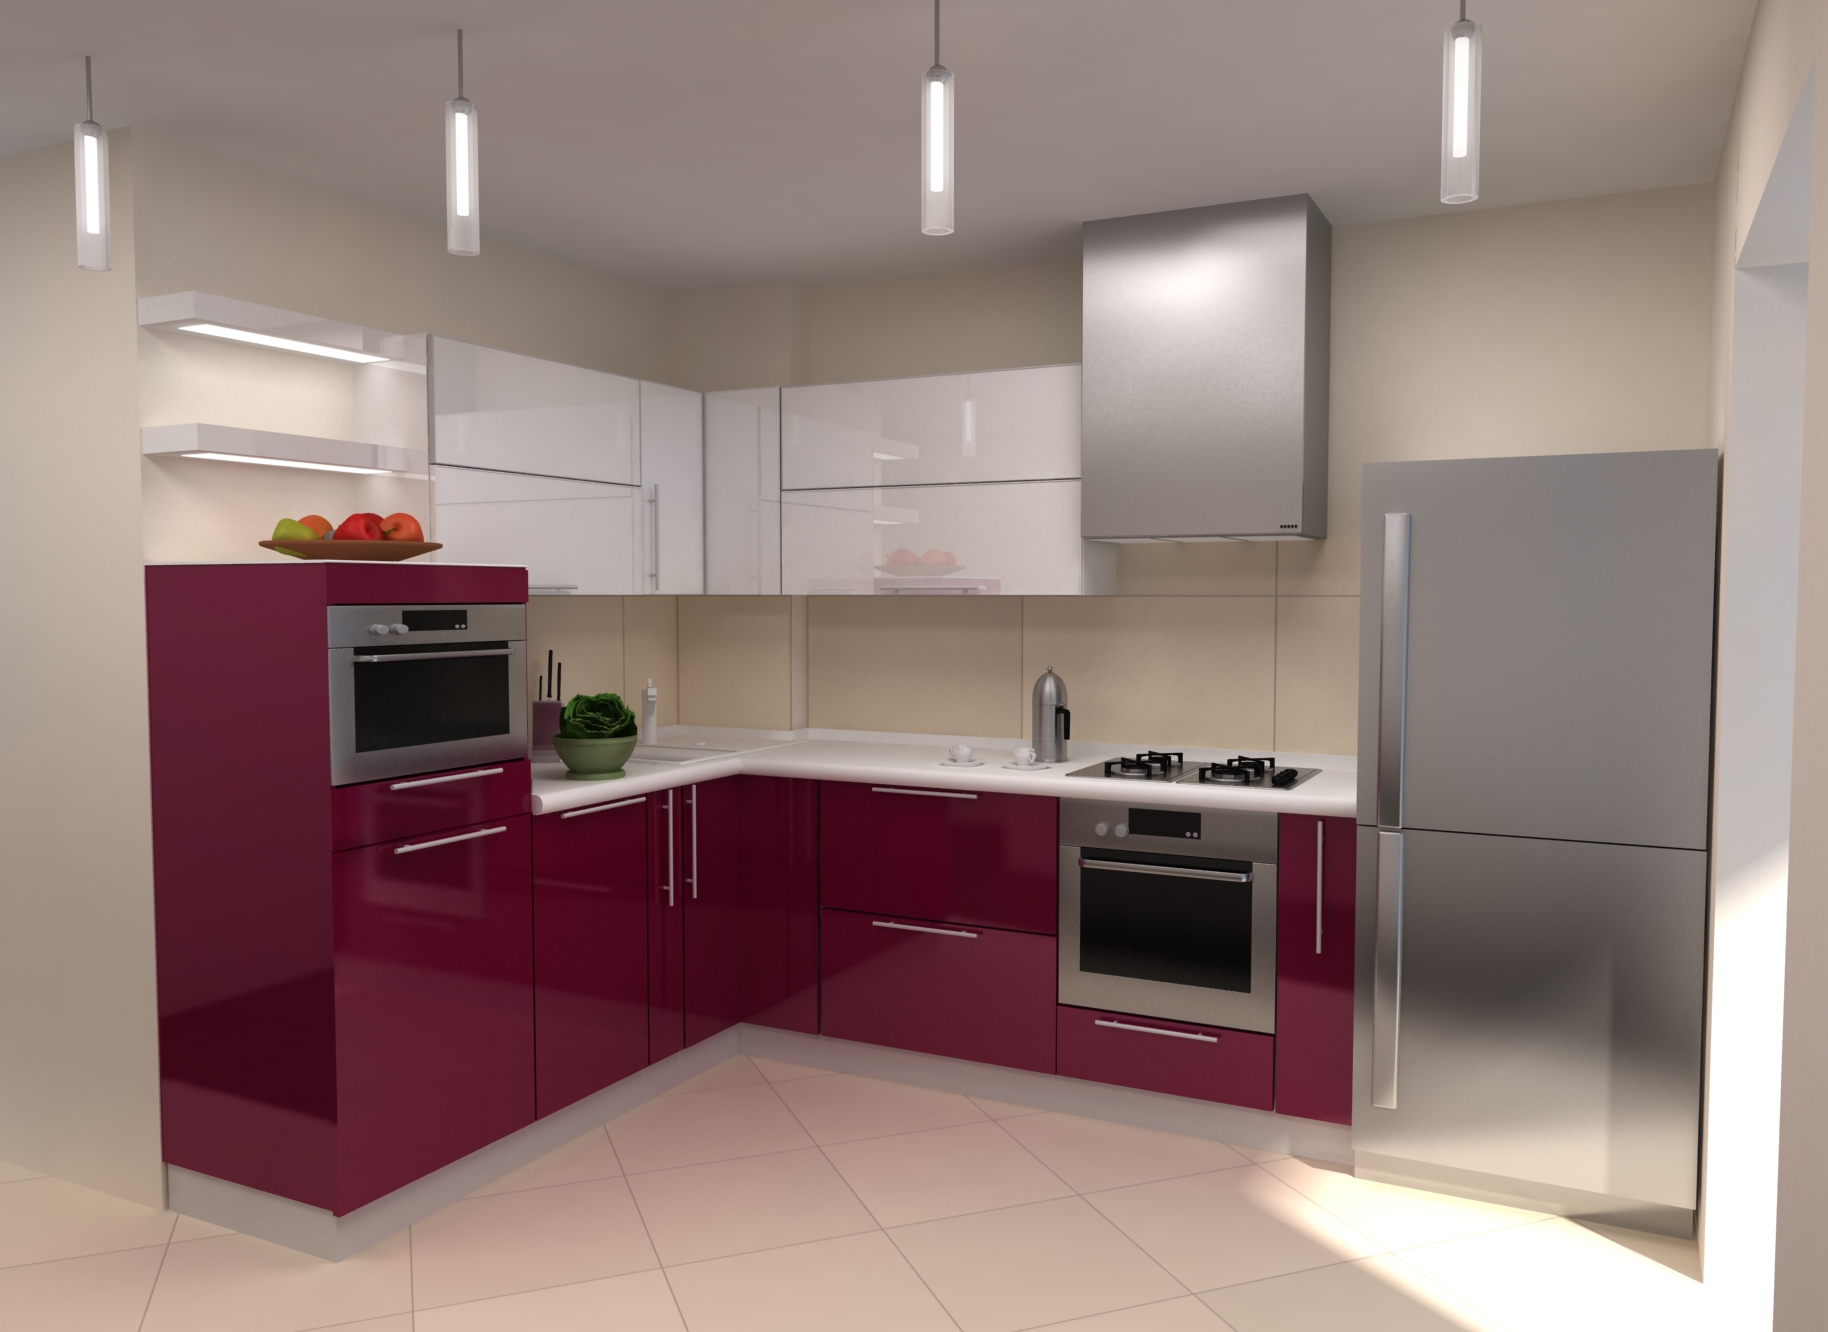 Maroon trim kitchen wallpapers and images - wallpapers, pictures, photos